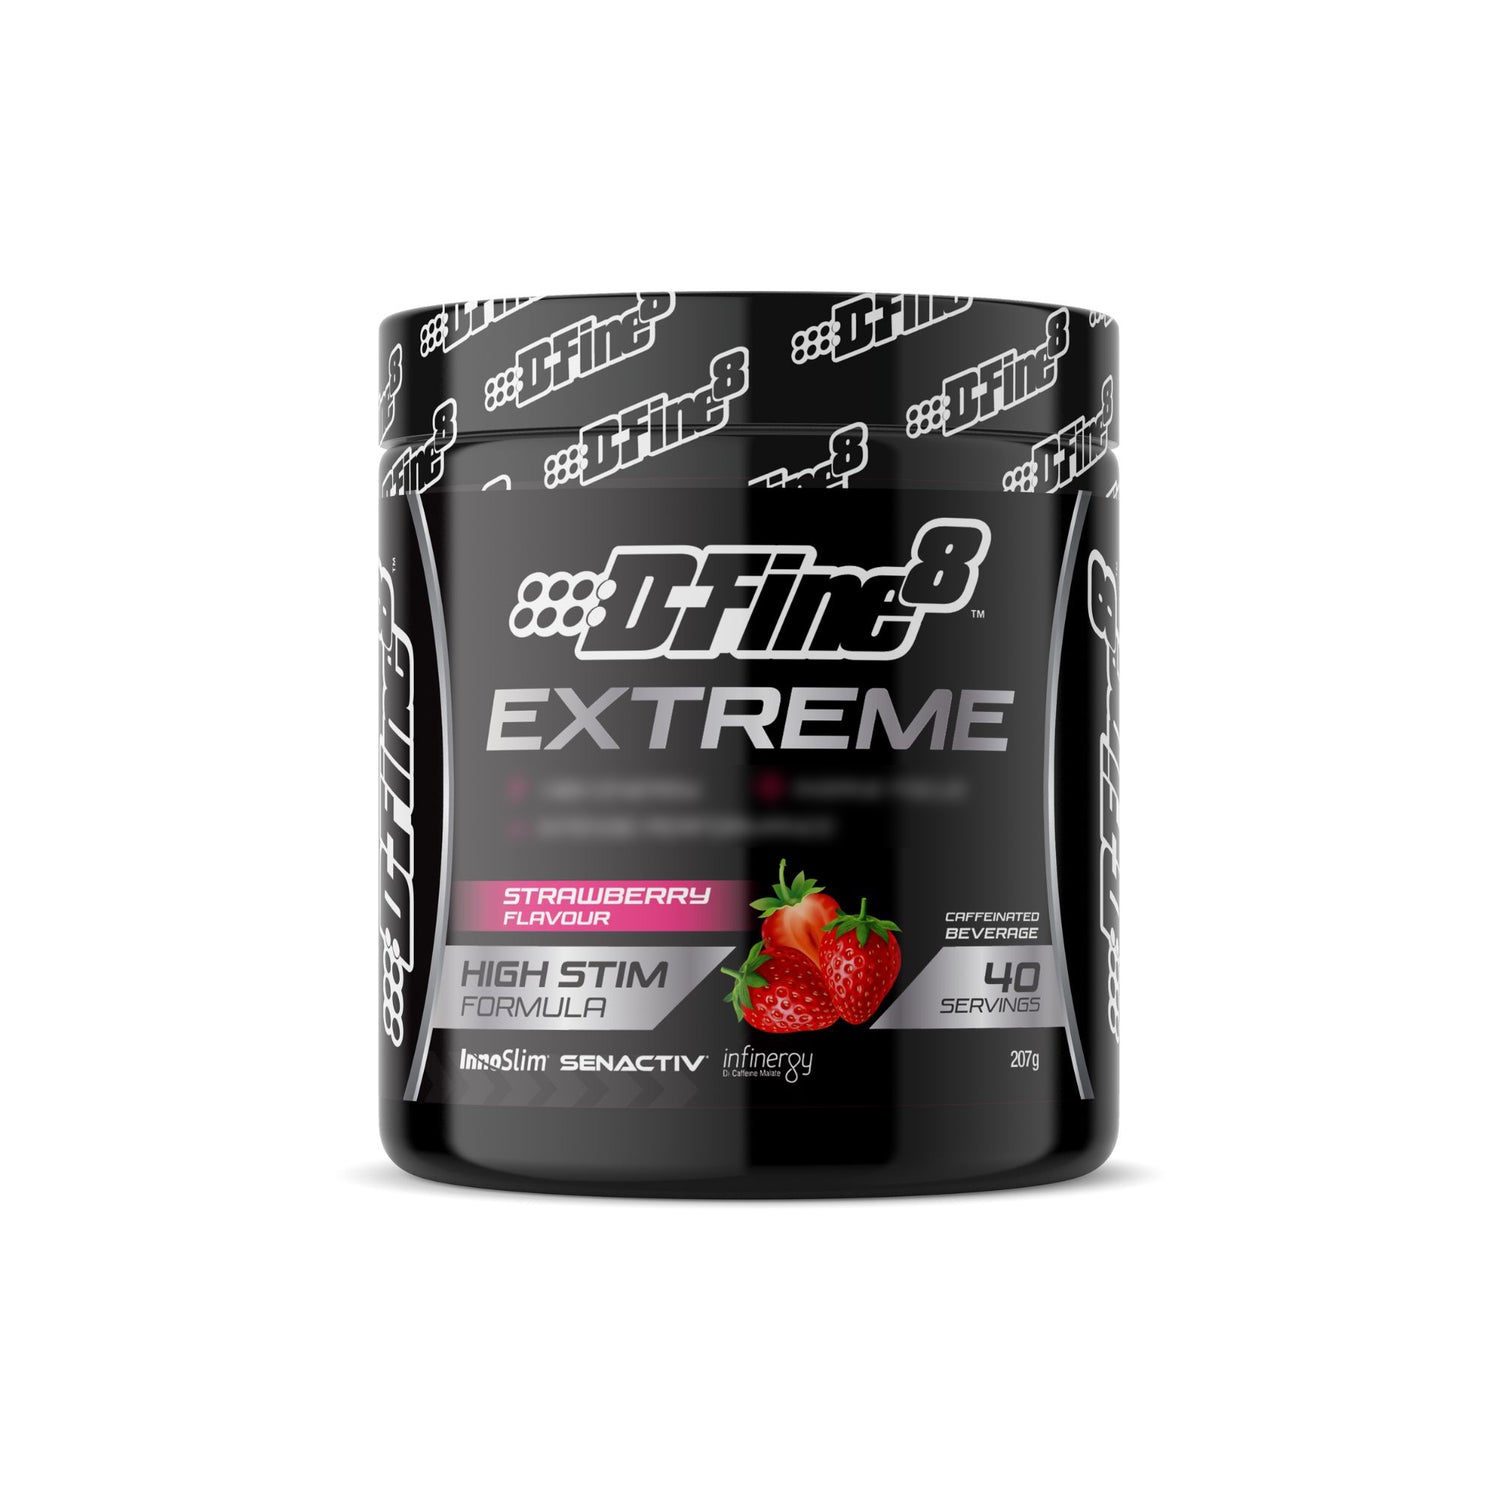 Musclewerks D-Fine8 Extreme